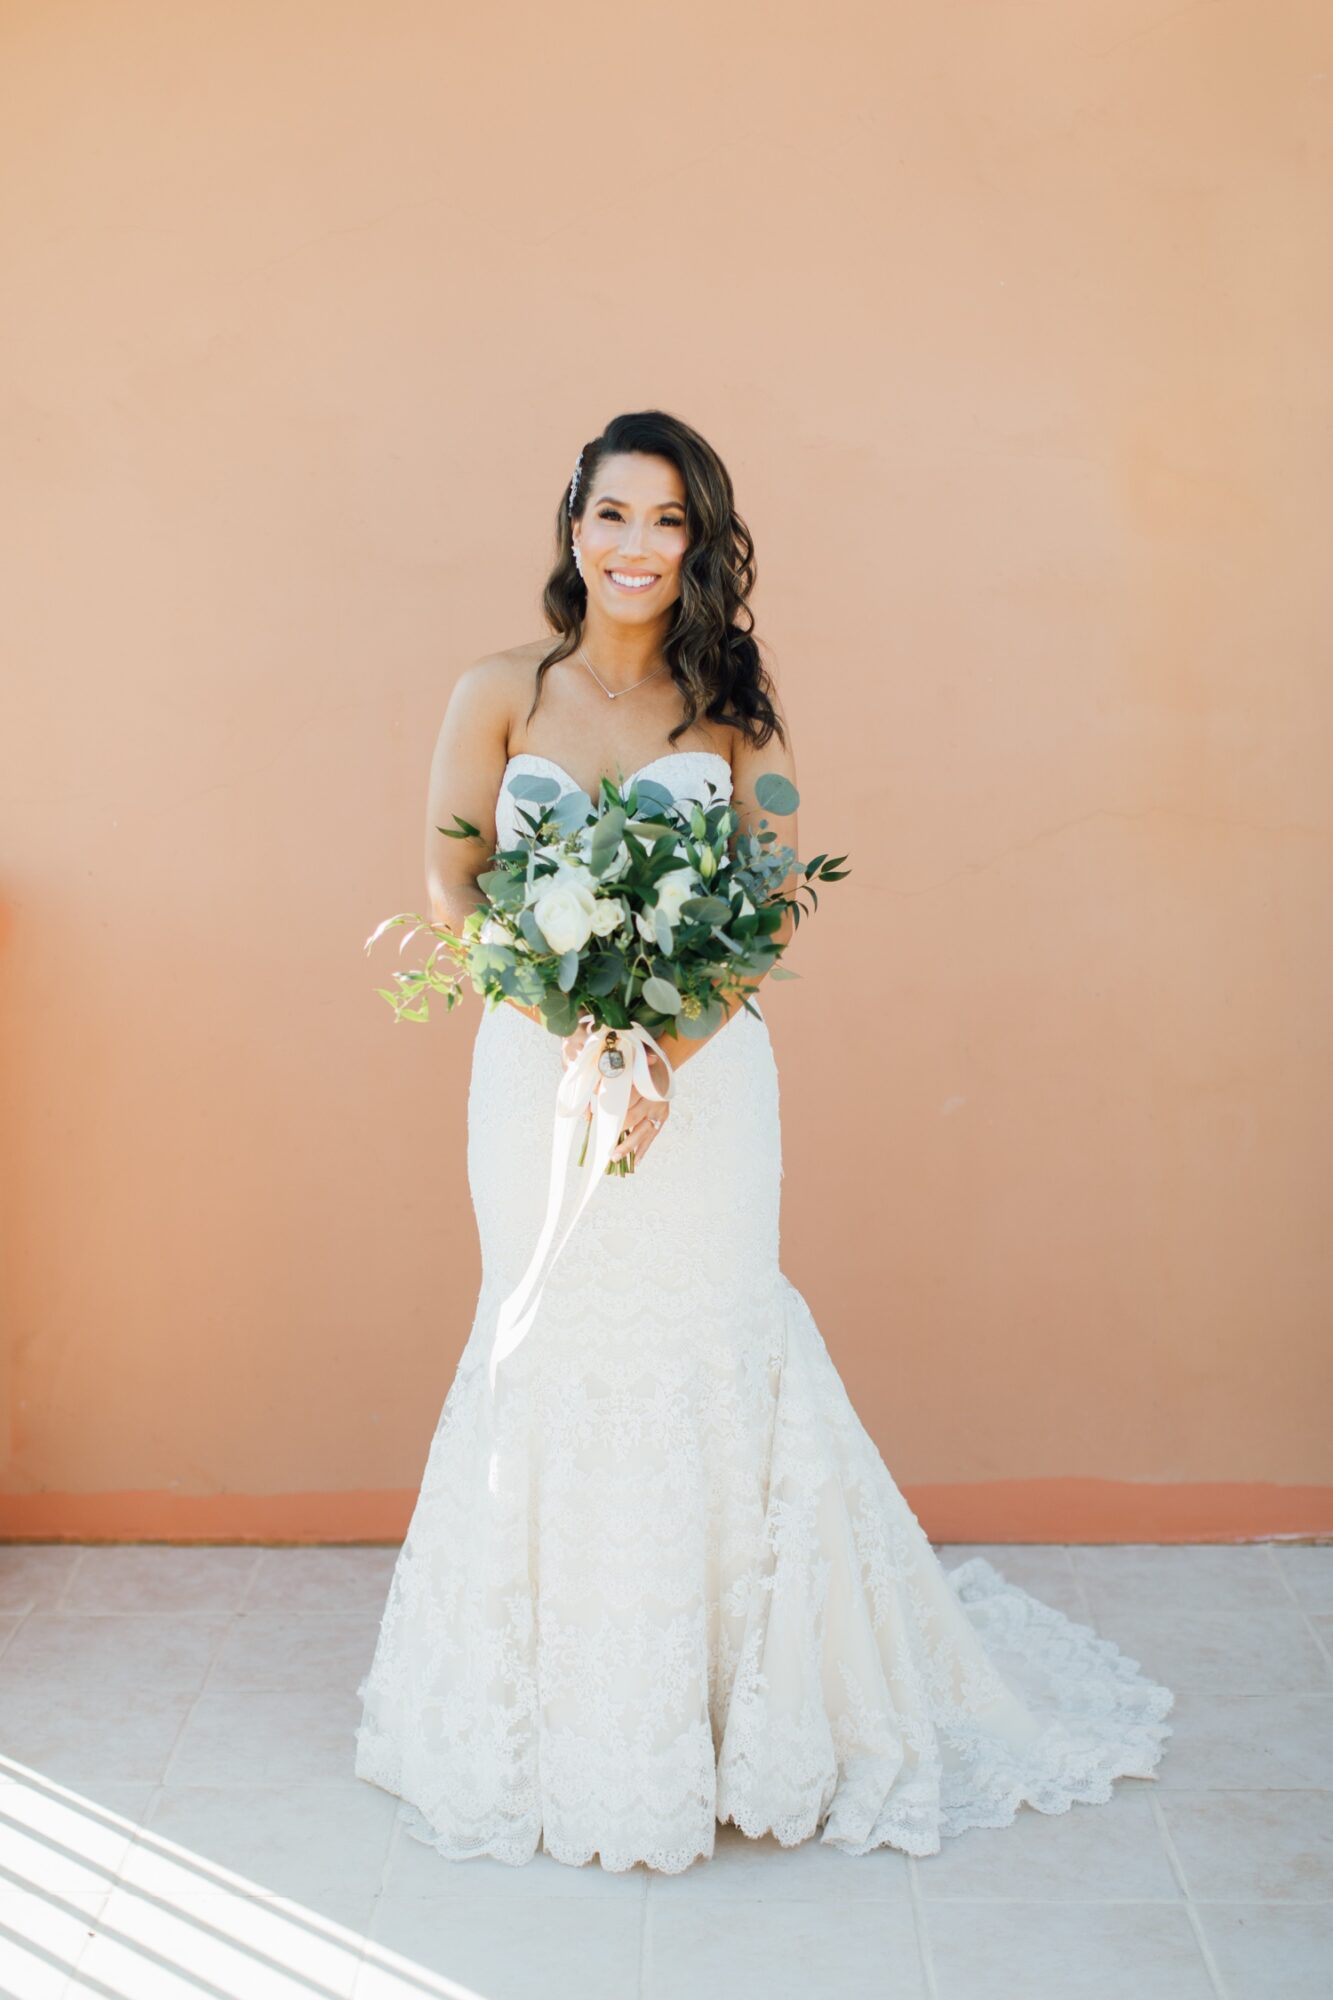 Bride at Tuscany inspired wedding at Aterno Estate in Paso Robles California by wine country photographer Jessica Sofranko